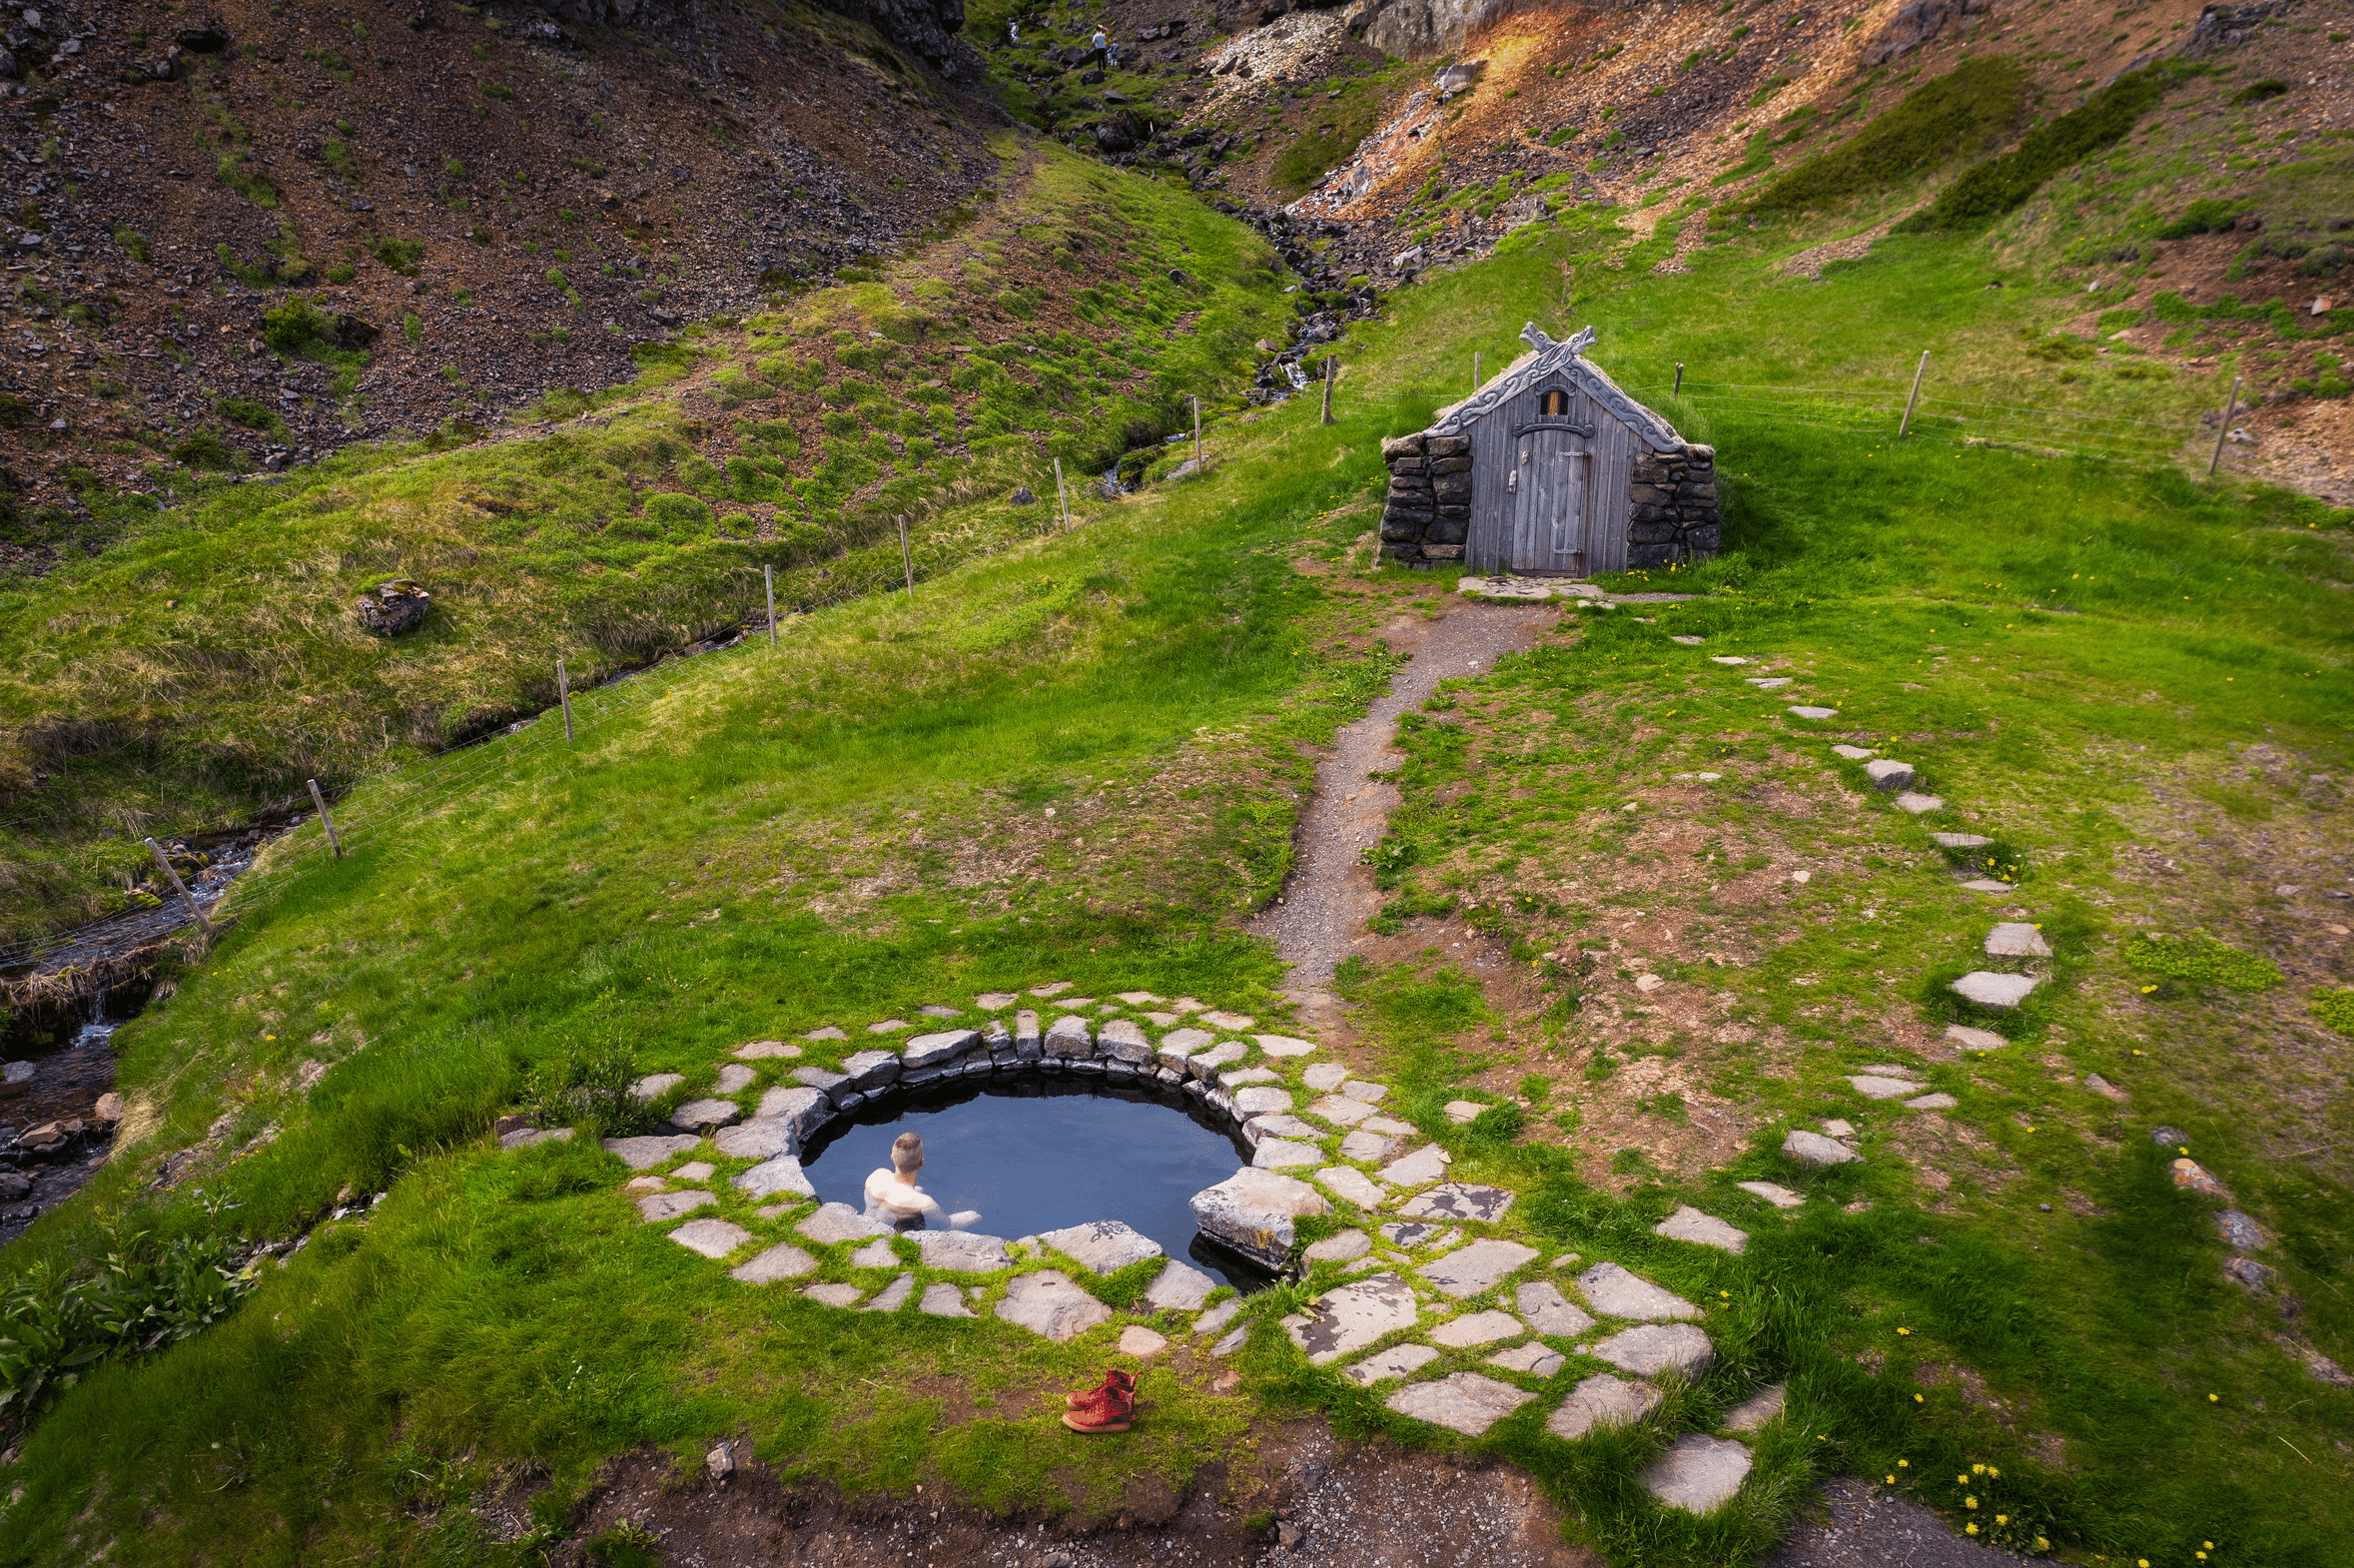 A woman relaxing in Gudrunarlaug Pool in West Iceland, a small turh house nearby.